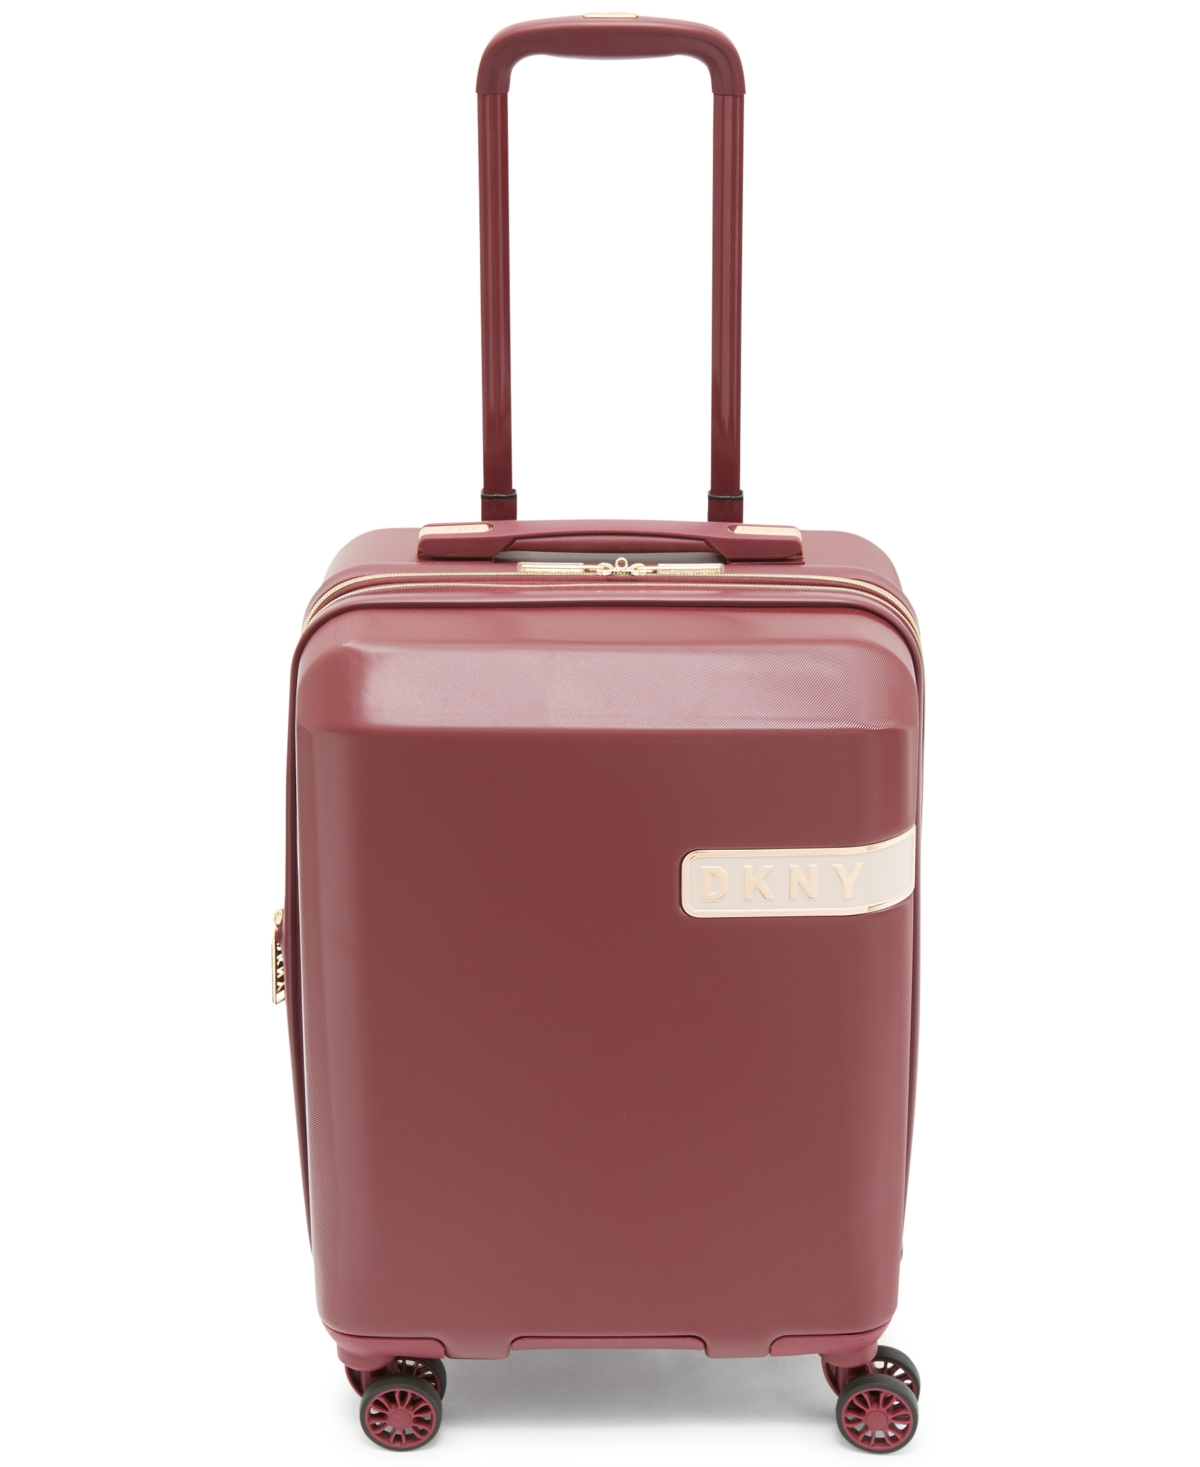 Closeout! Dkny Rapture 20" Hardside Carry-On Spinner Suitcase - Primrose